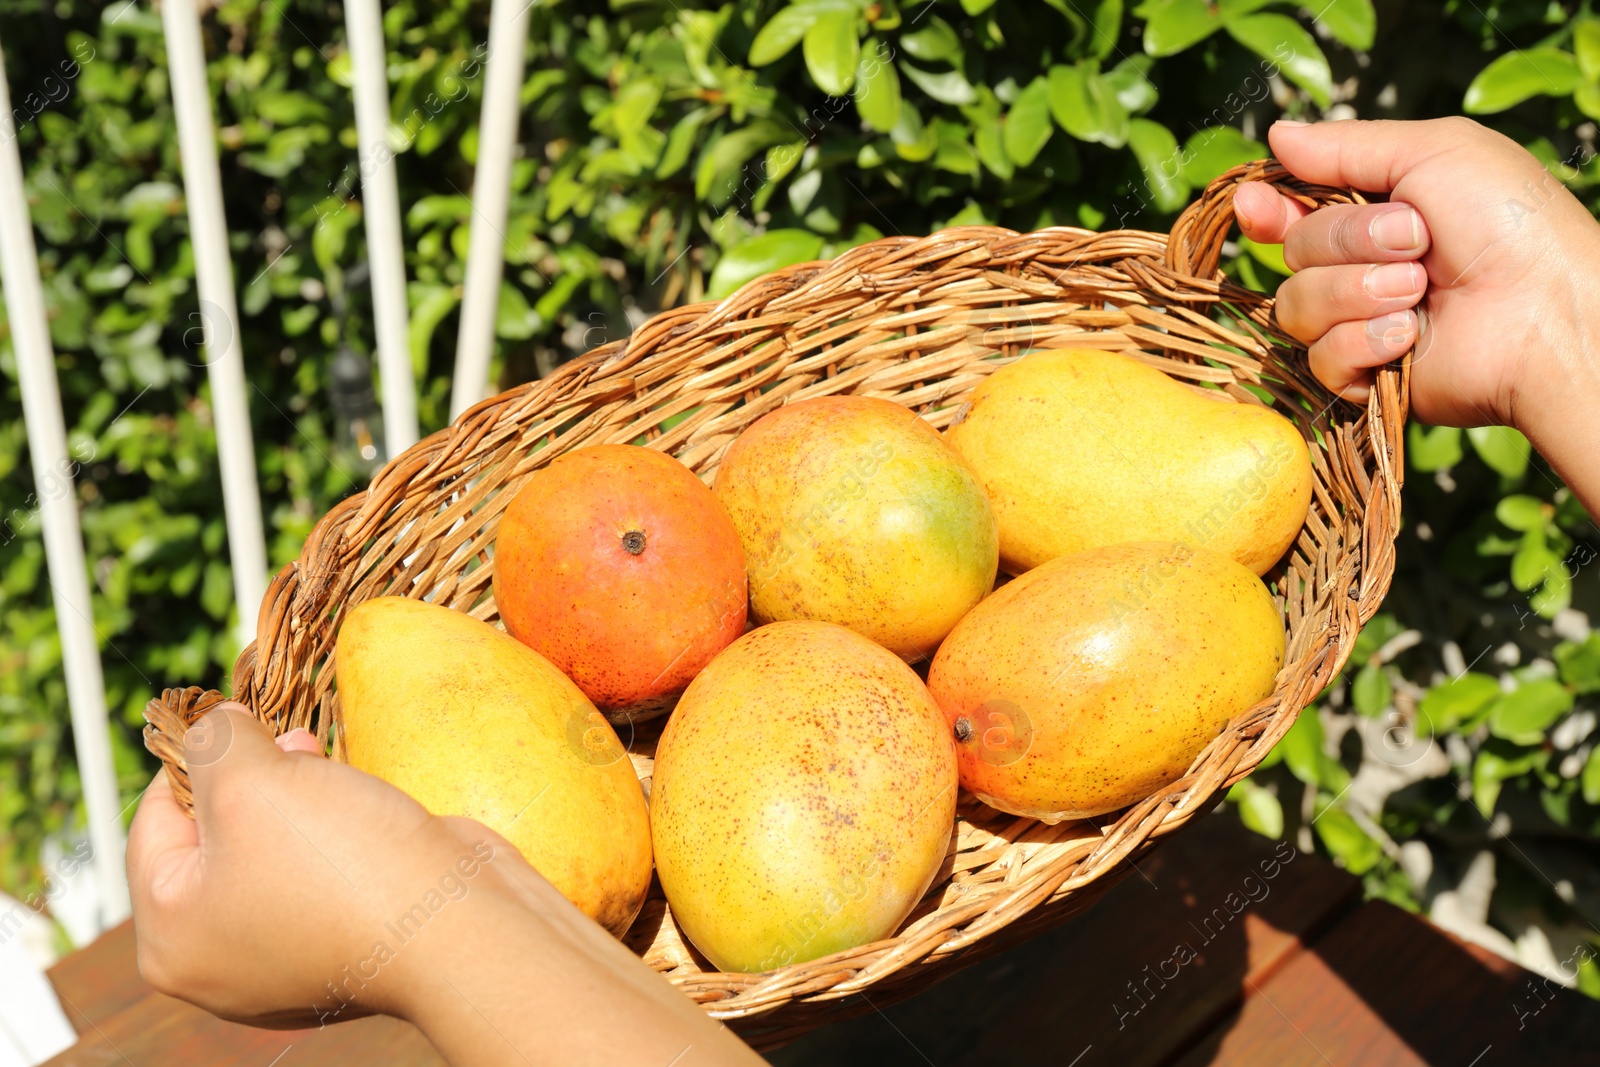 Photo of Woman holding wicker basket with tasty mangoes outdoors, closeup